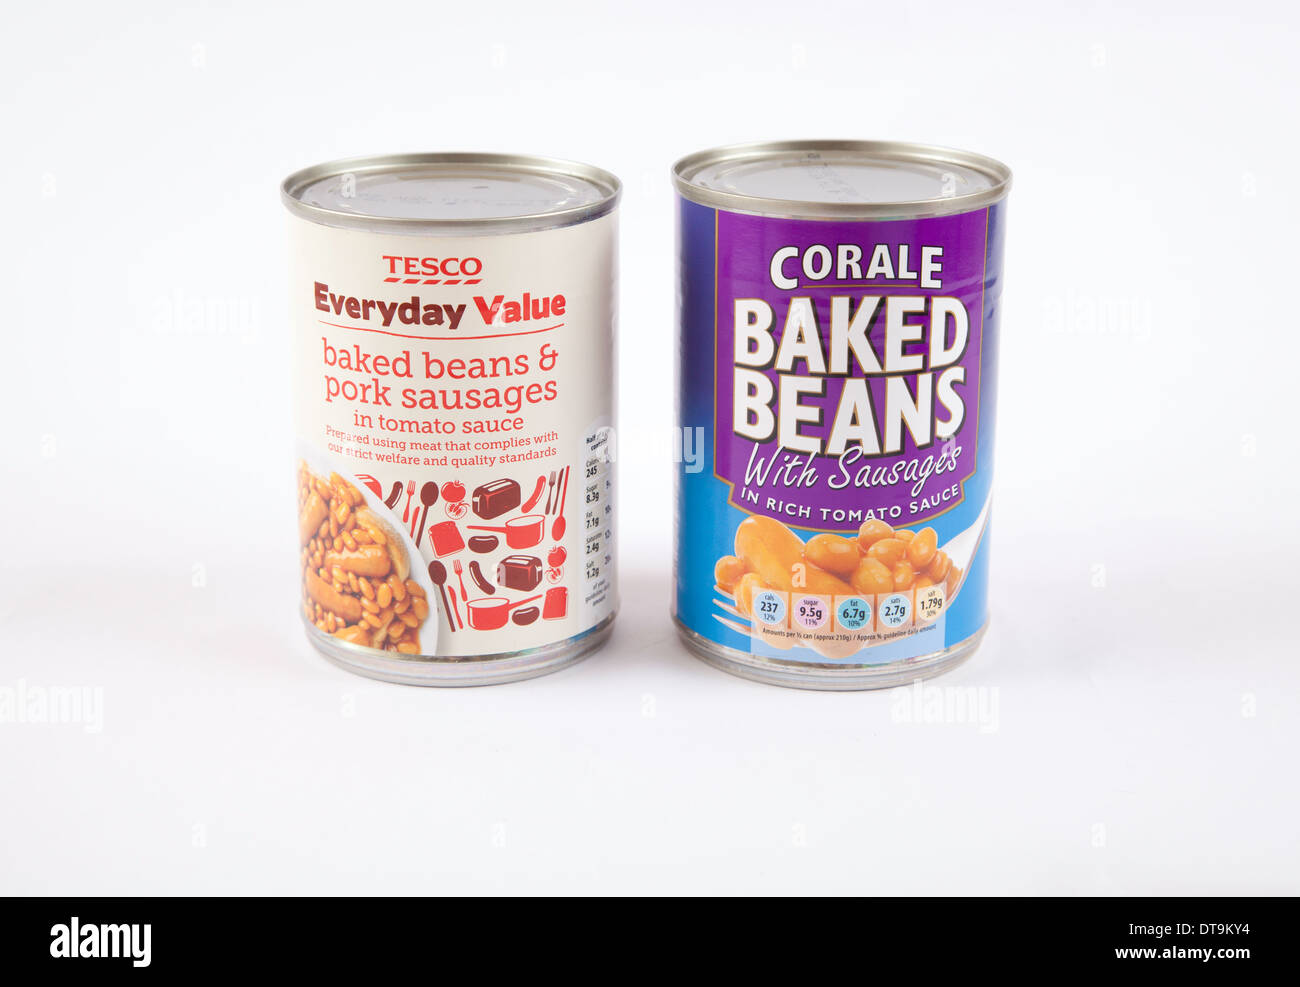 Tesco Everyday Value and Corale Tinned Baked Beans and Sausages on White Background. Supermarket Own Brands. Stock Photo